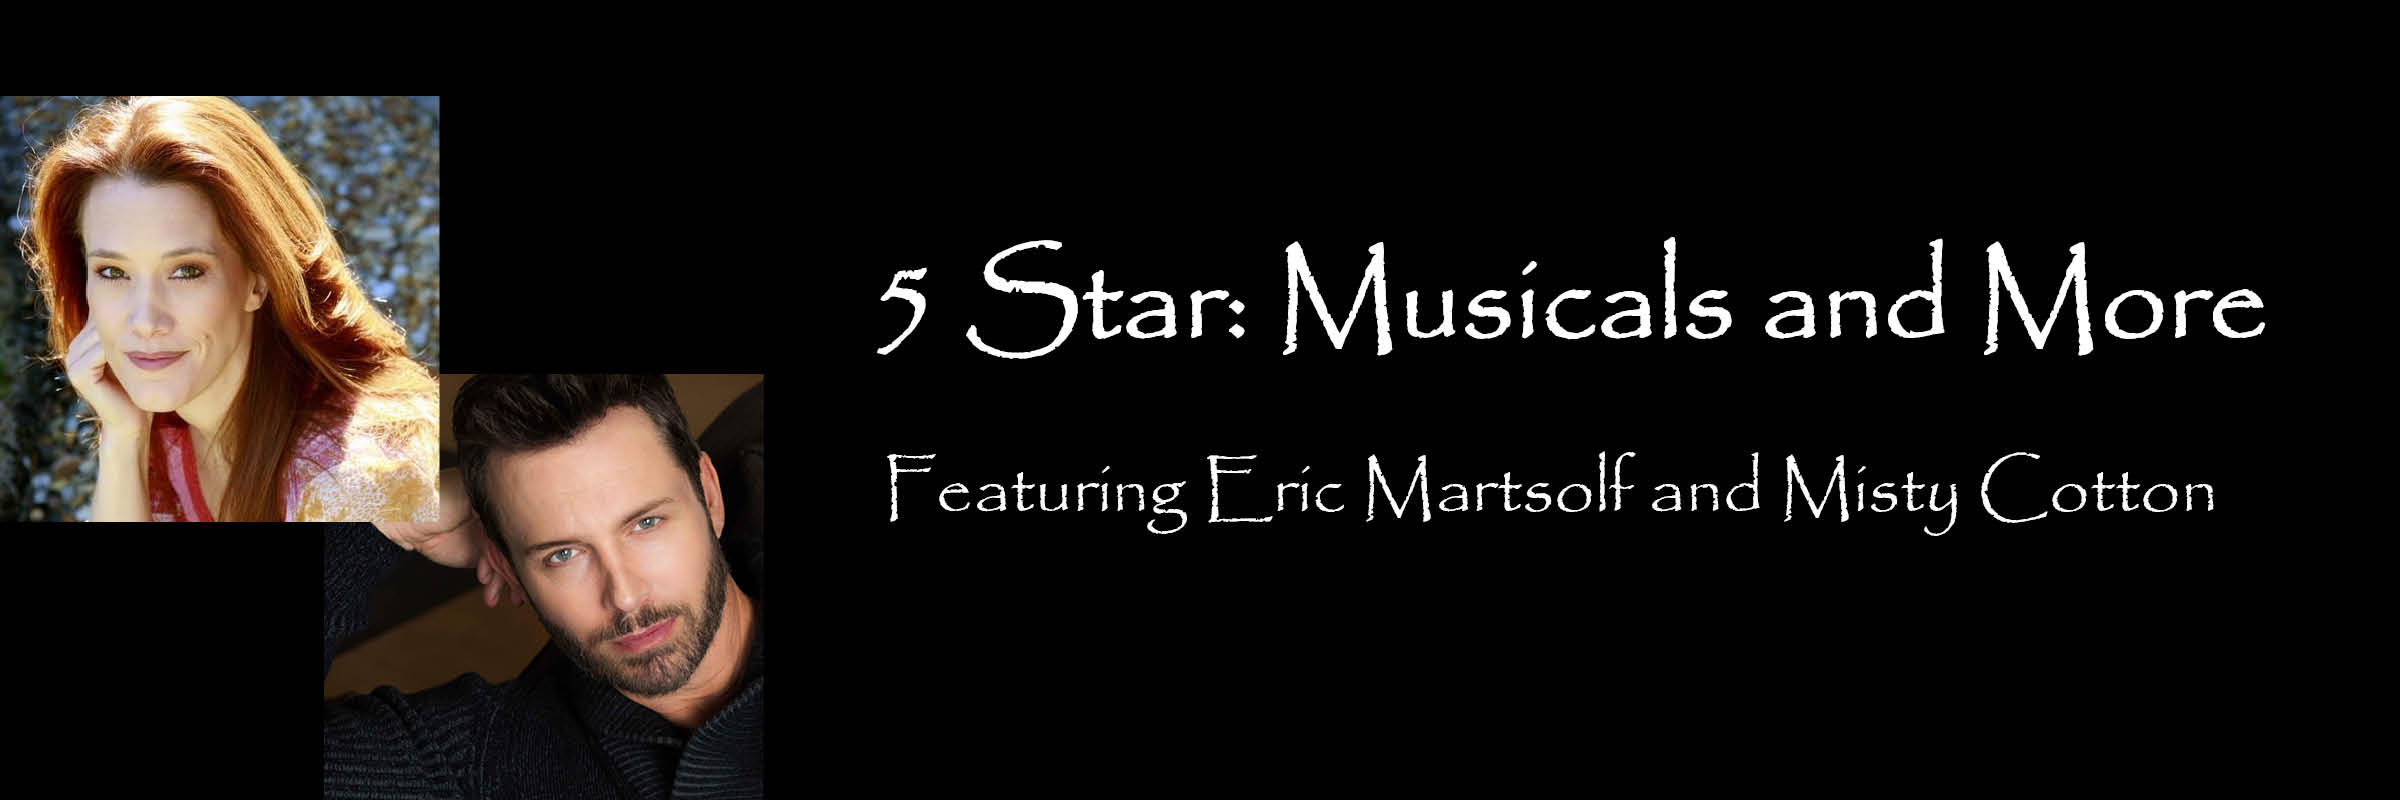 5-Star: Musicals and More